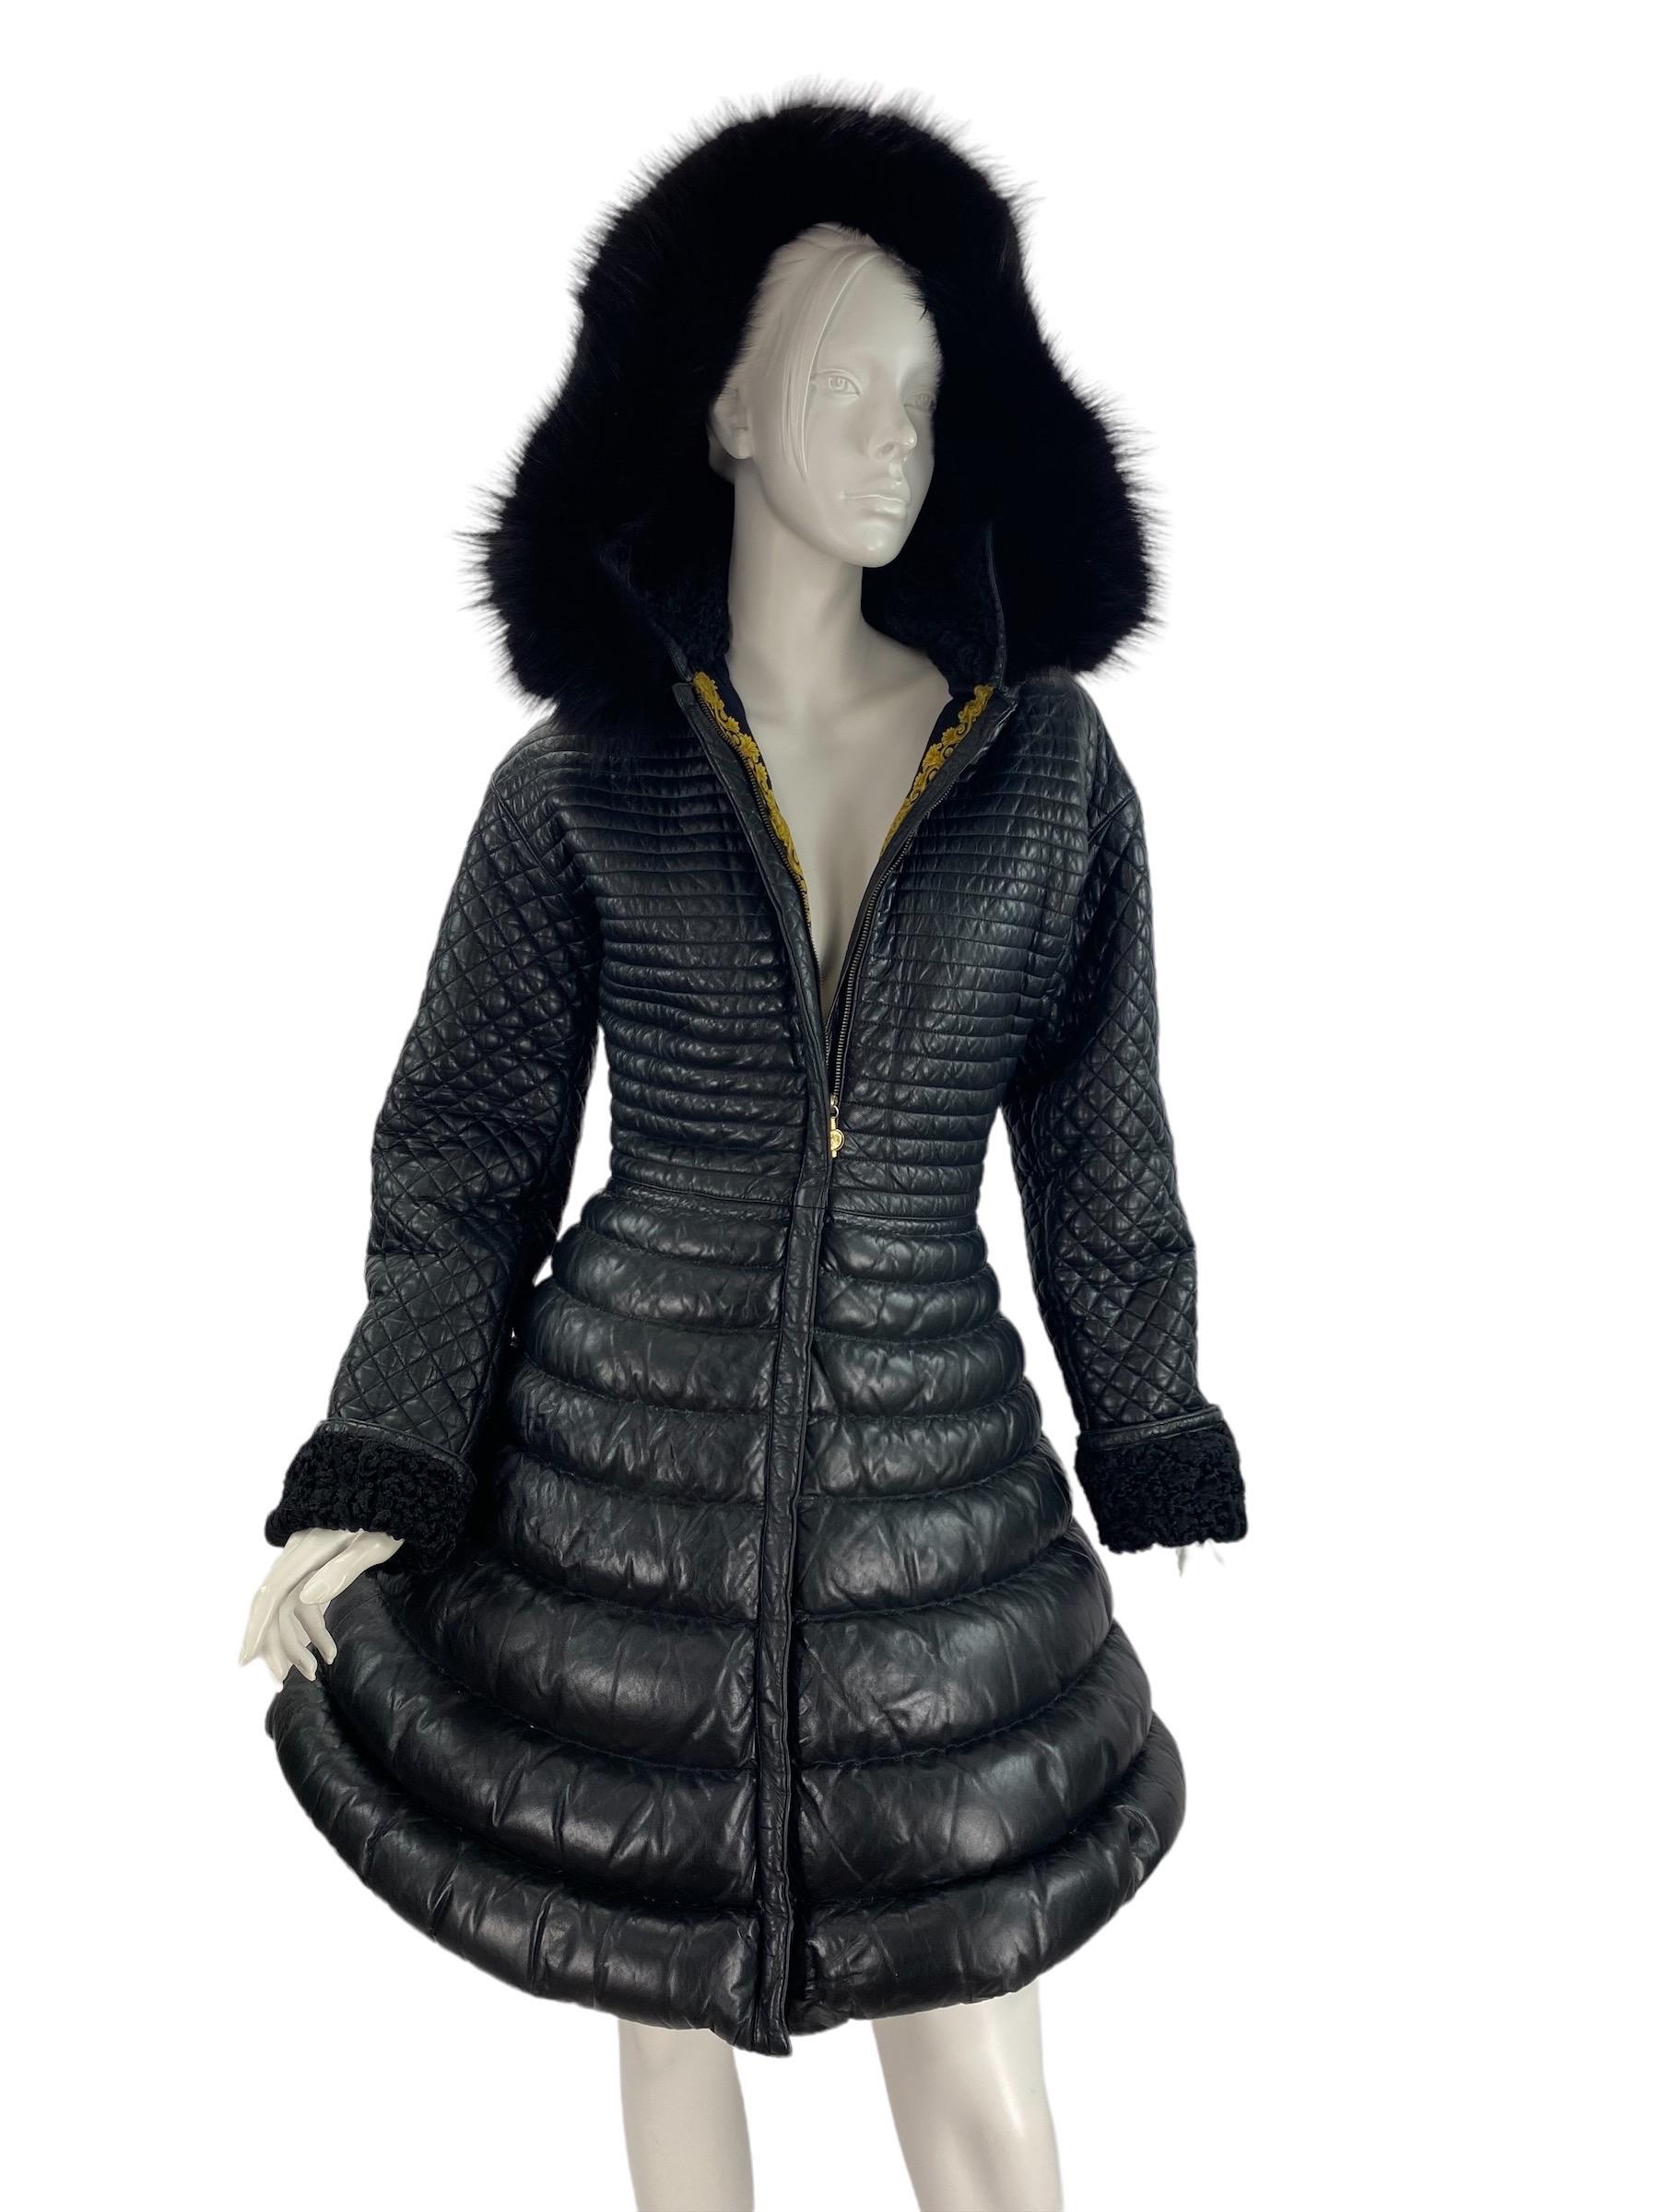 F/W 1992 Rare Vintage Gianni Versace Leather Bondage Black Leather Coat - Museum grade!
Approximate size is 4
Quilted leather, Down filling, Removable hood with Fox fur, Barocco print lining, Front zipper closure.
Measurements: Bust - 36 inches,